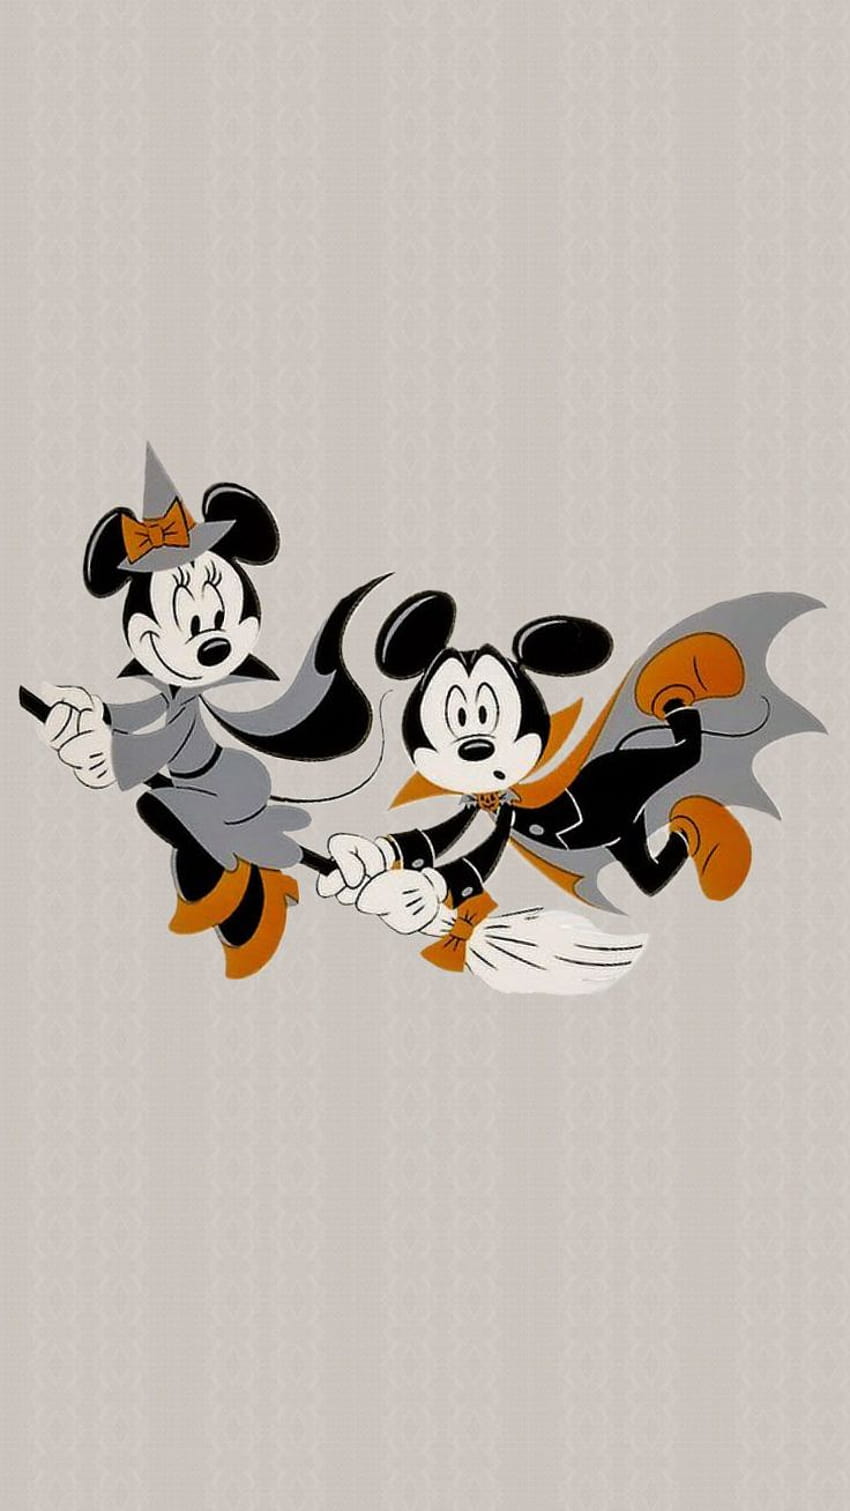 Mickey mouse and minnie are flying on a broomstick - Minnie Mouse, witch, Mickey Mouse